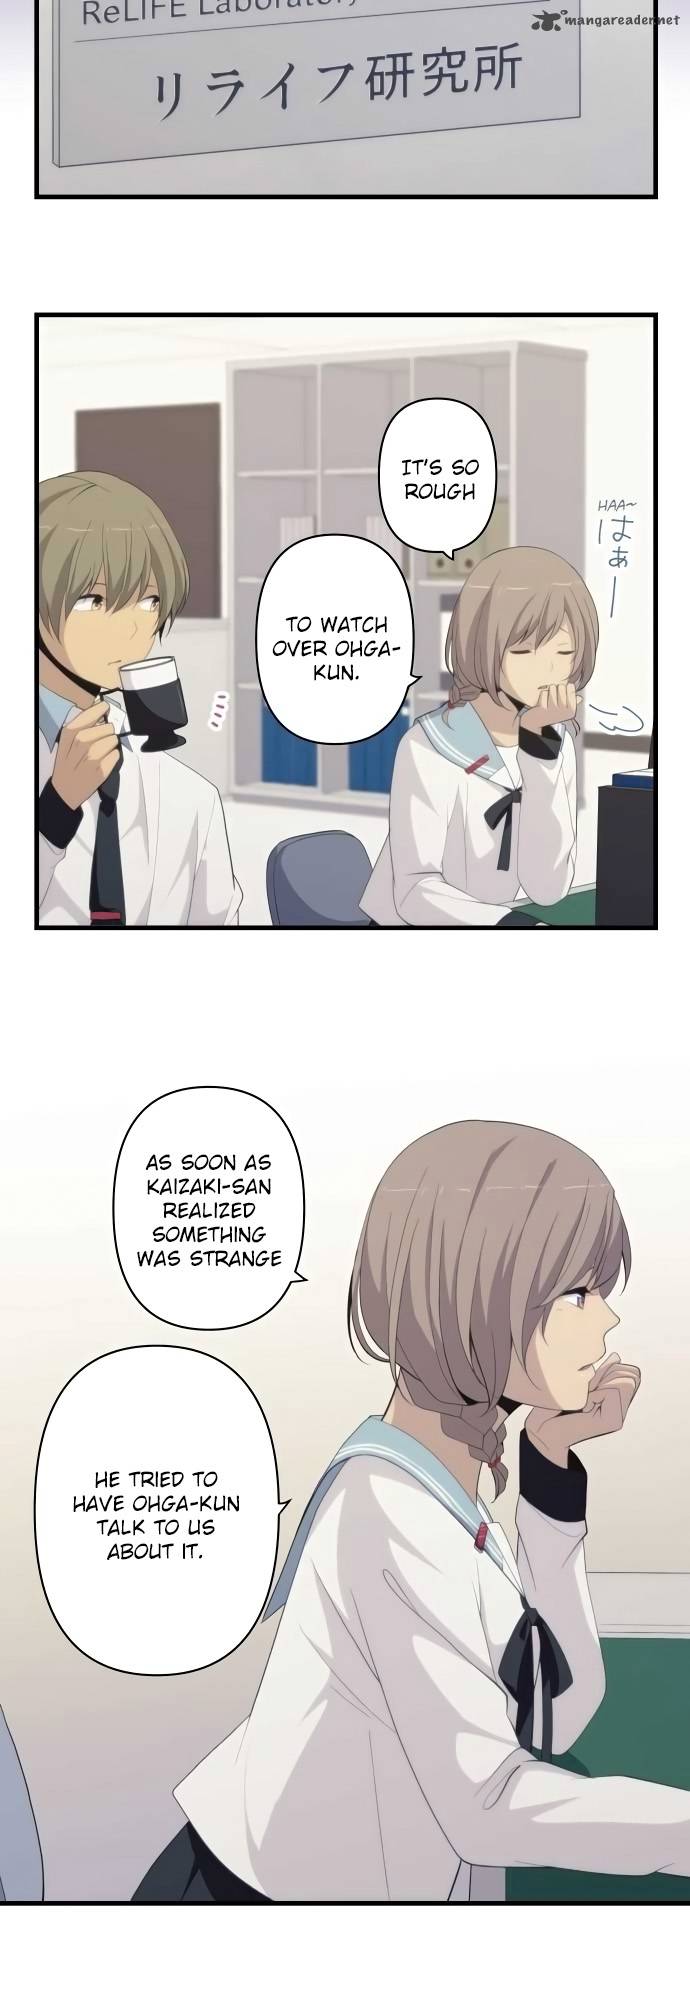 Relife 162 10